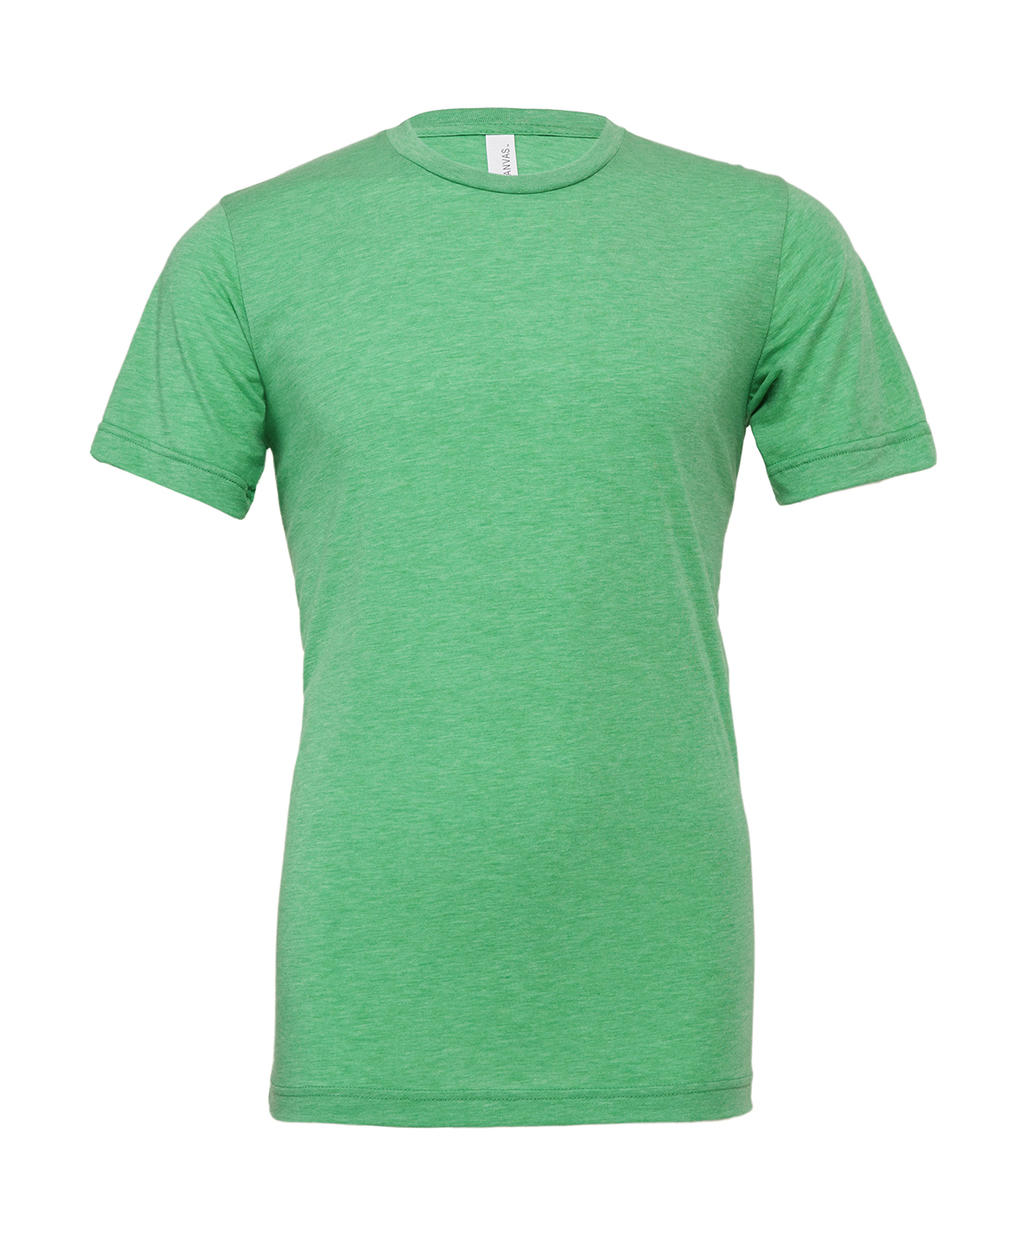  Unisex Triblend Short Sleeve Tee in Farbe Green Triblend